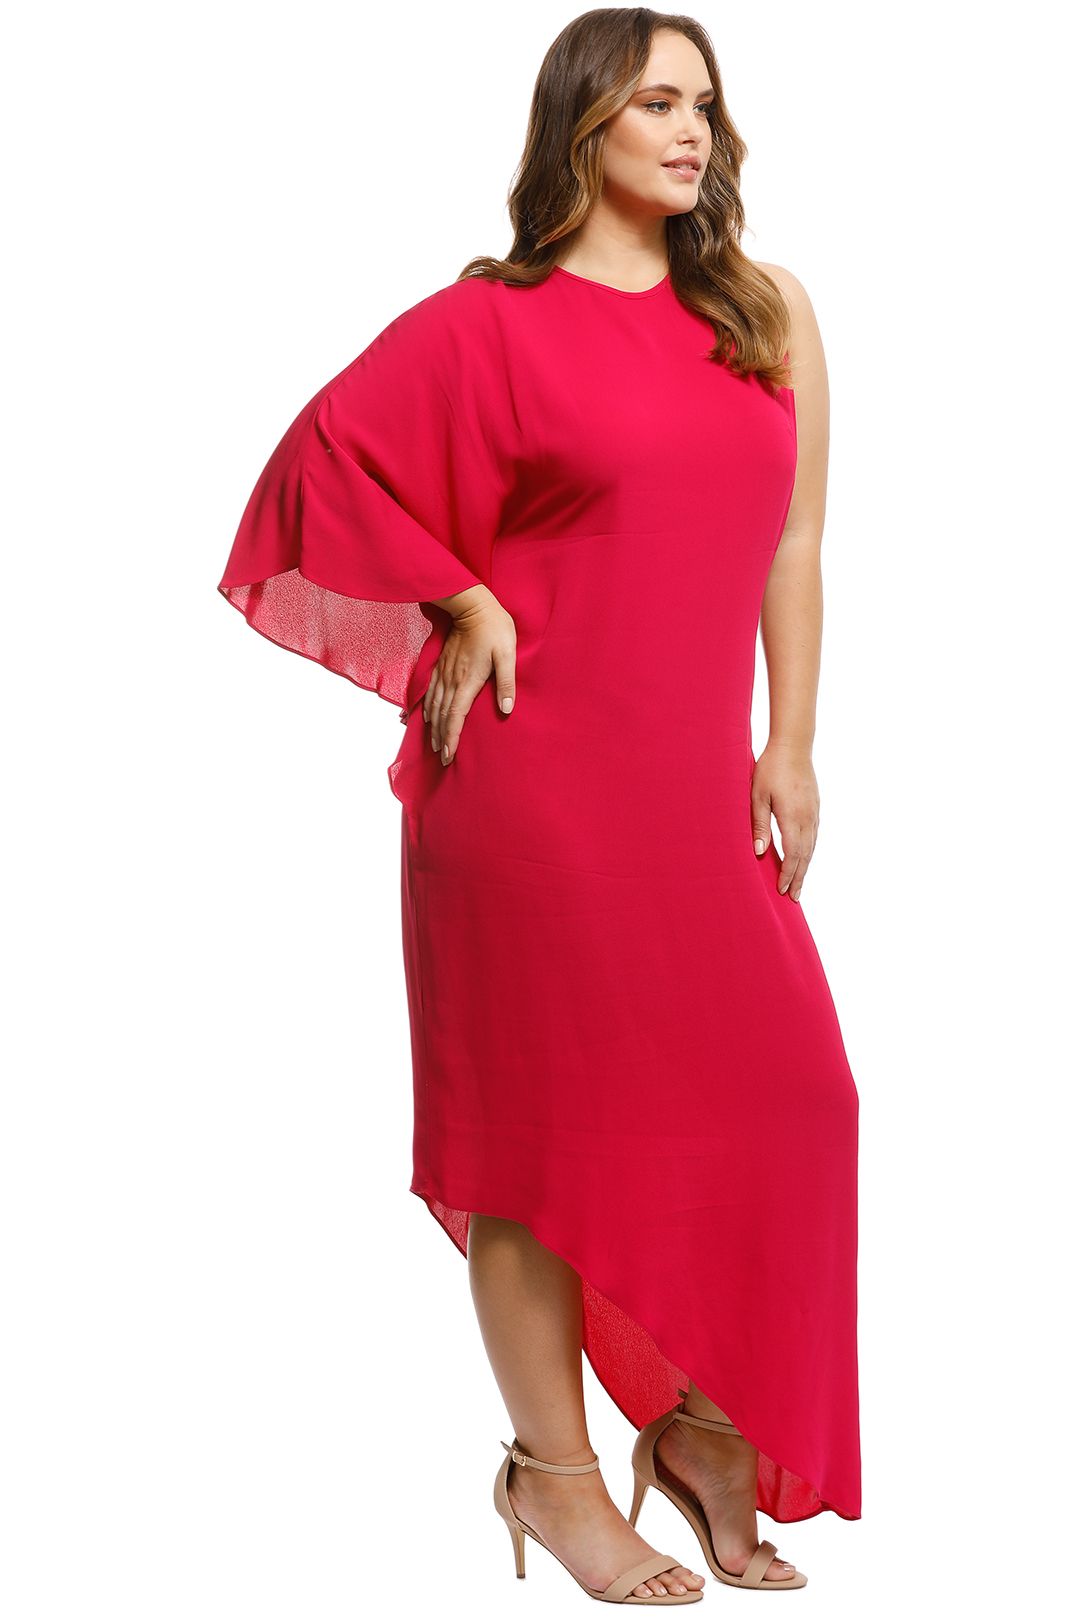 Ginger and Smart - Stasis Maxi Dress - Pink - Side